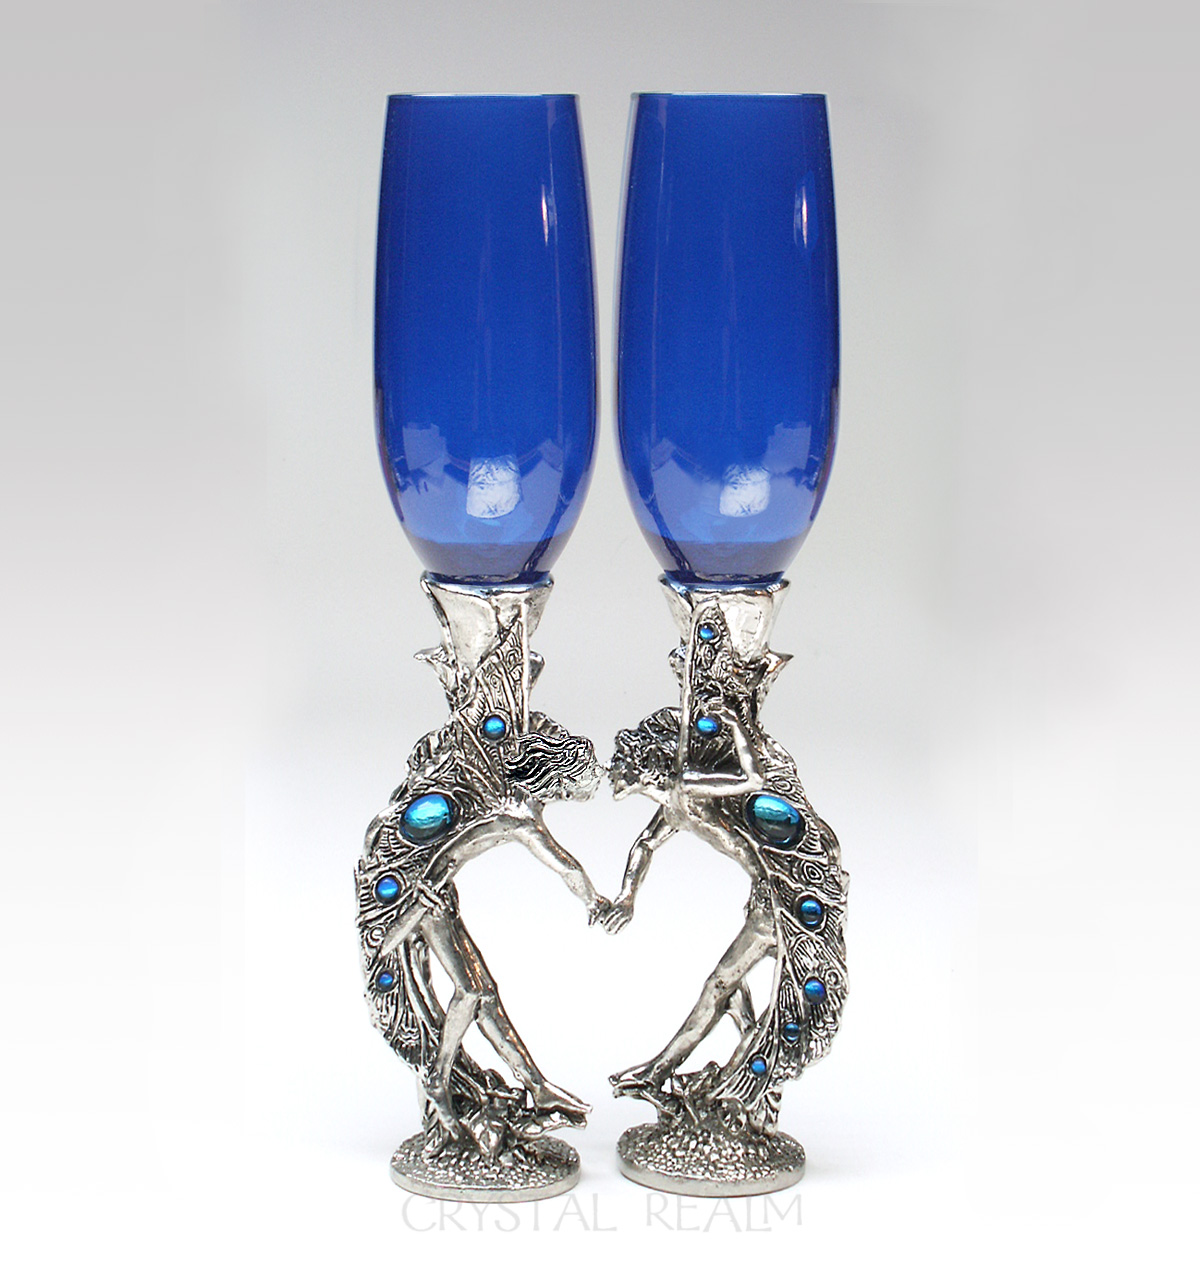 Girl-boy blue champagne glasses with fairies in a heart shape